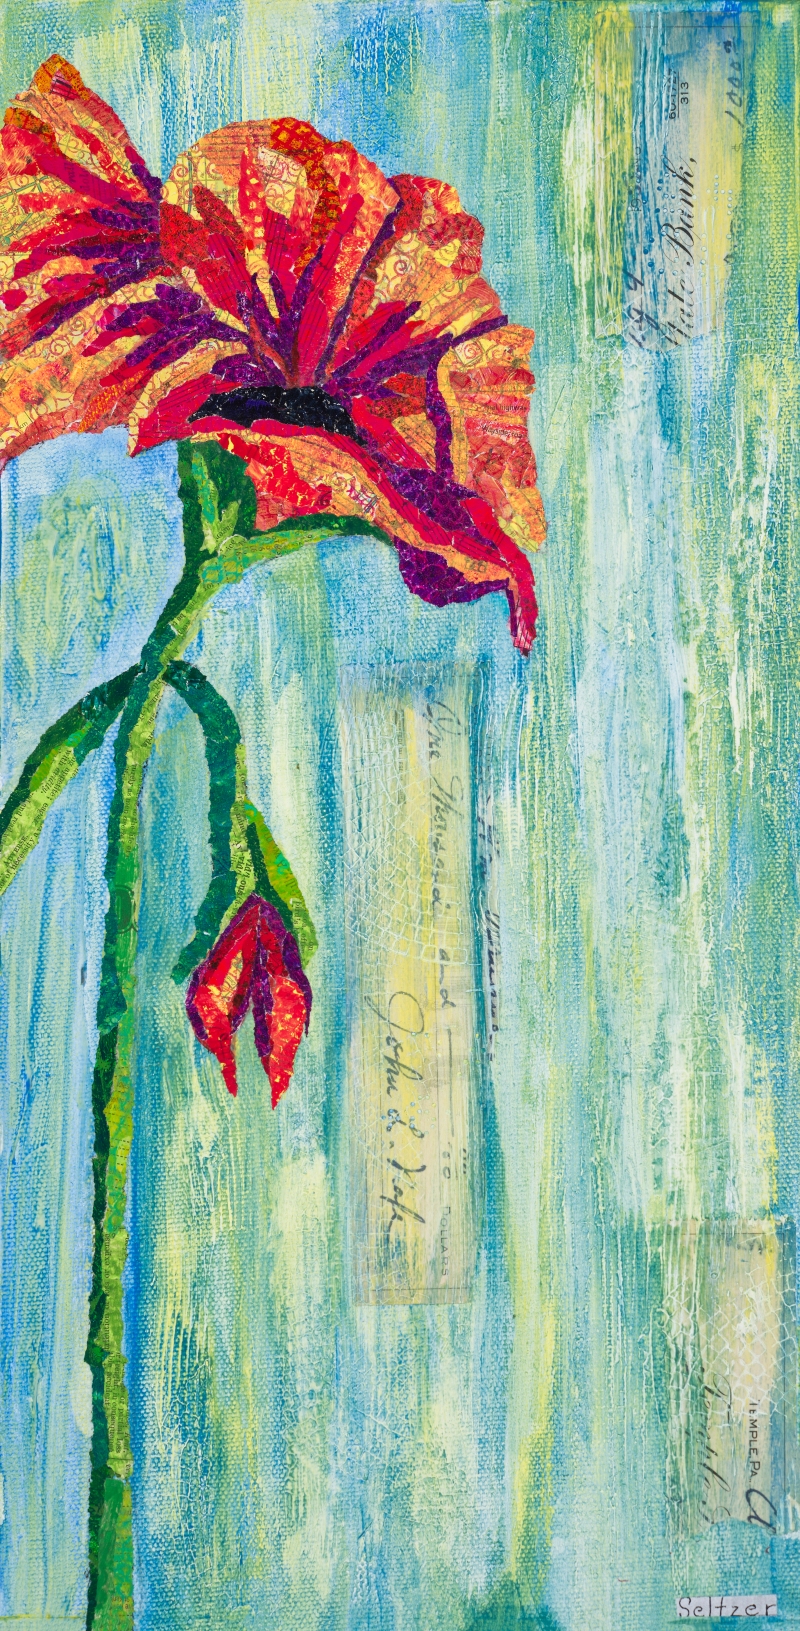 Red flower blue and green background, mono printed torn paper collage mixed media